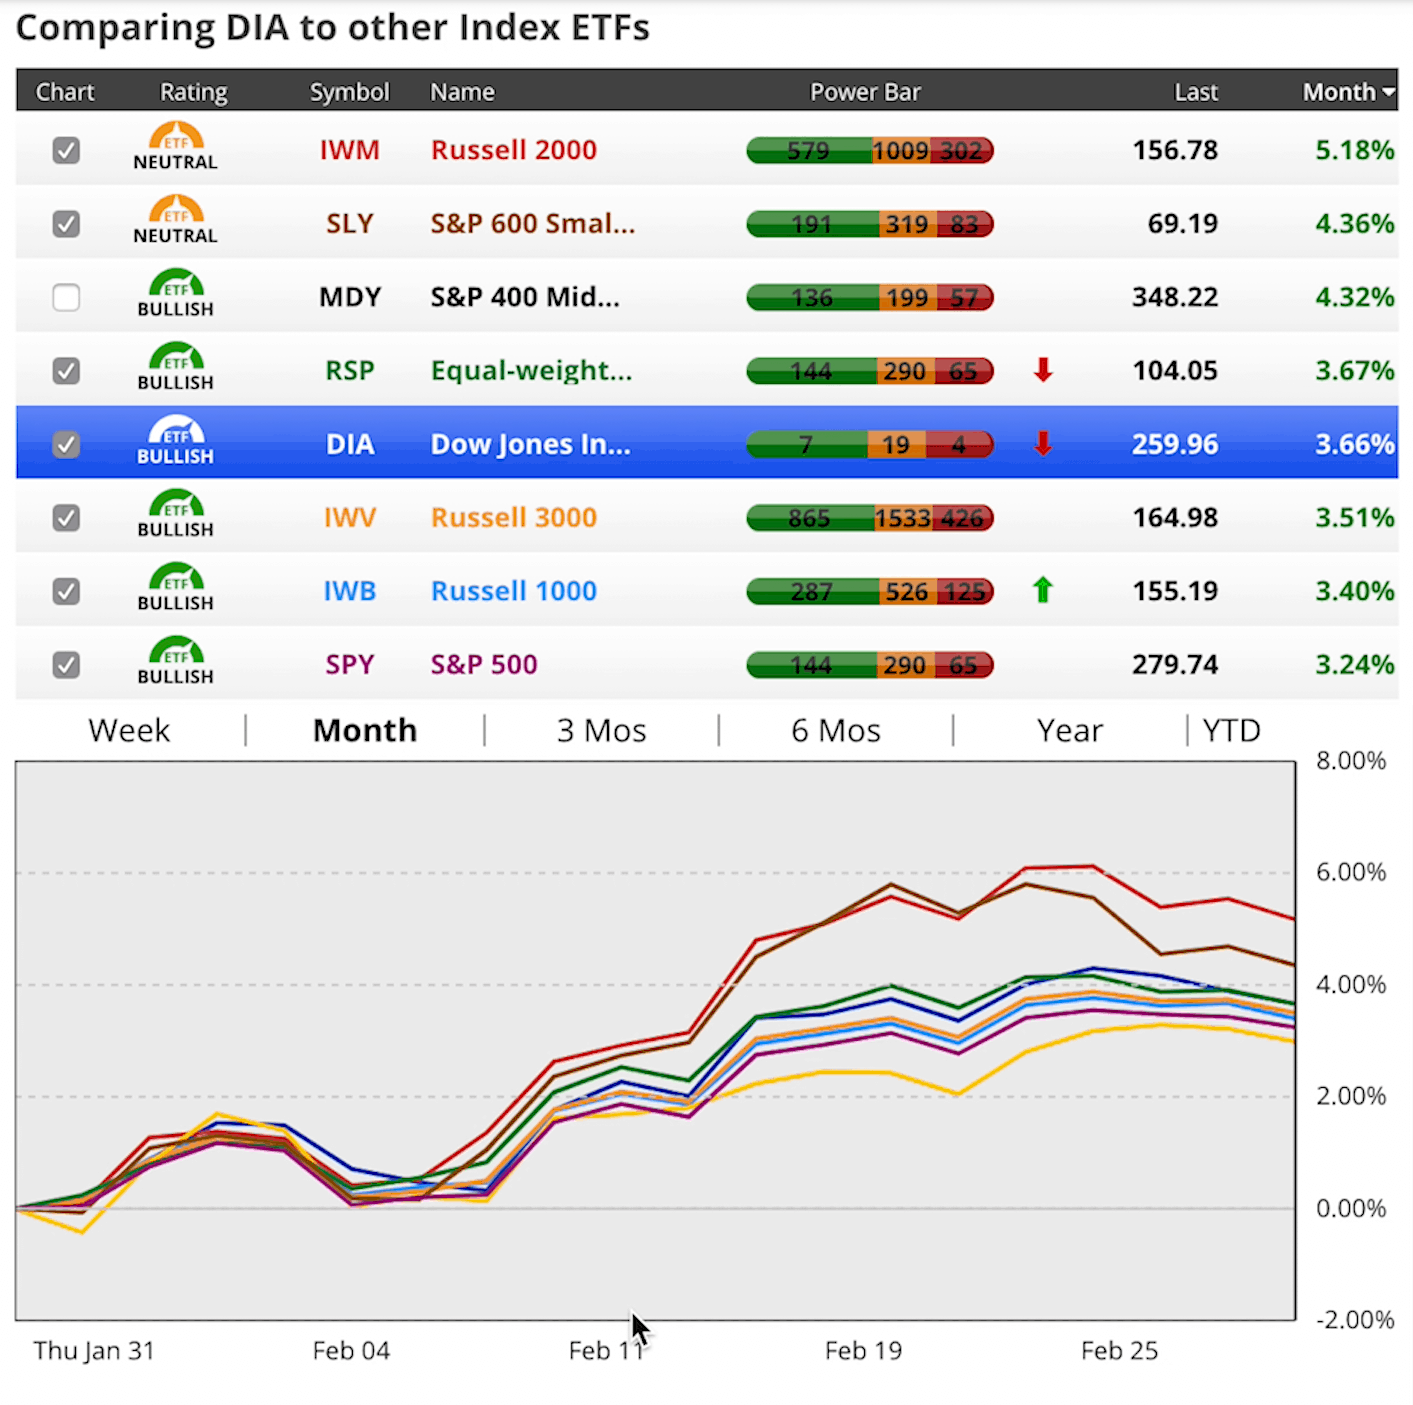 gdp growth and interest rates - index performance february 2019